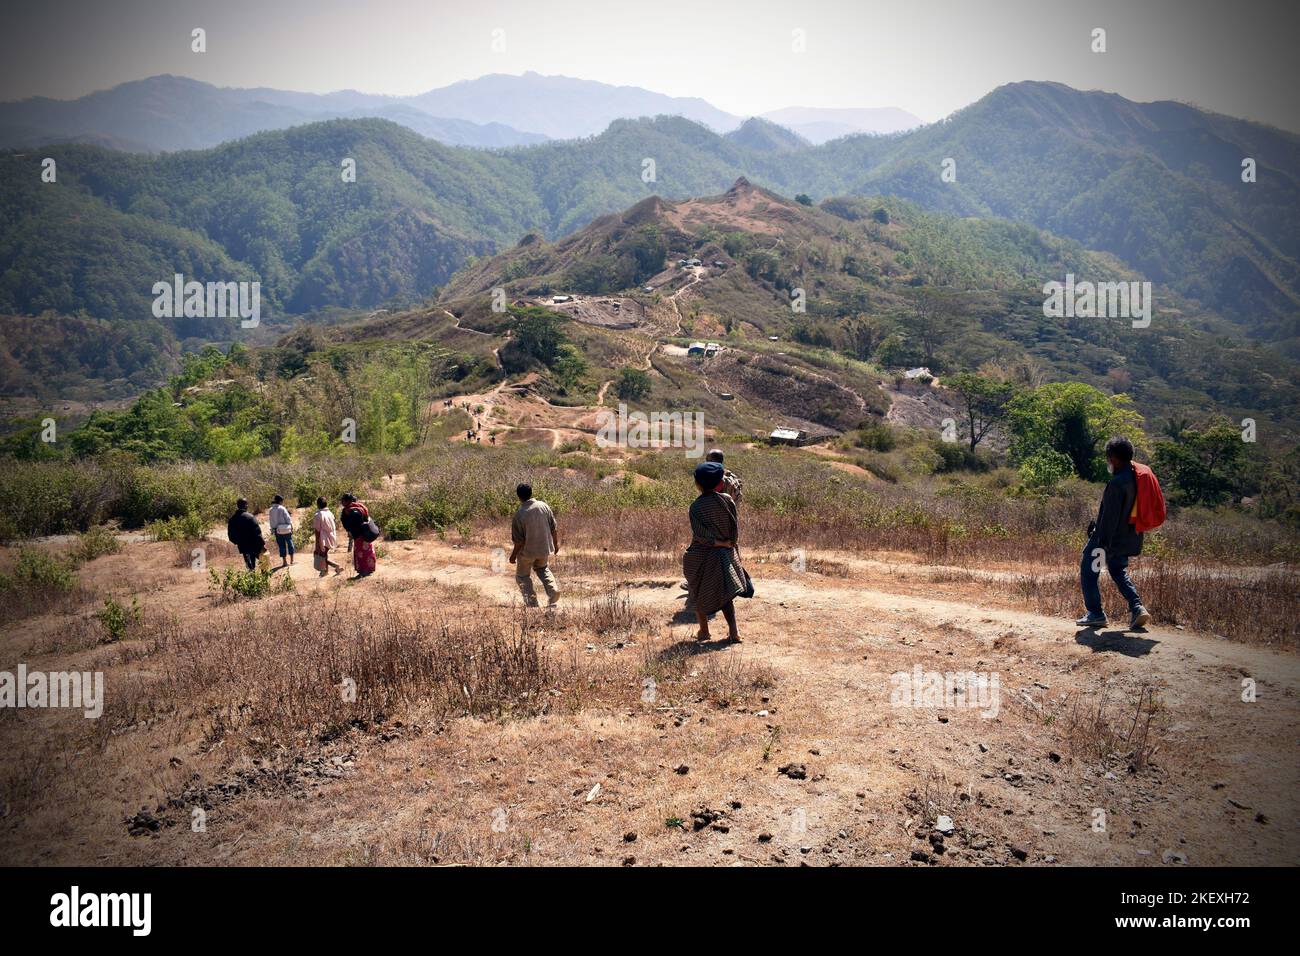 East Timor, View from the top of a village in a rural area, community activities. Manufahi, Timor Leste Stock Photo